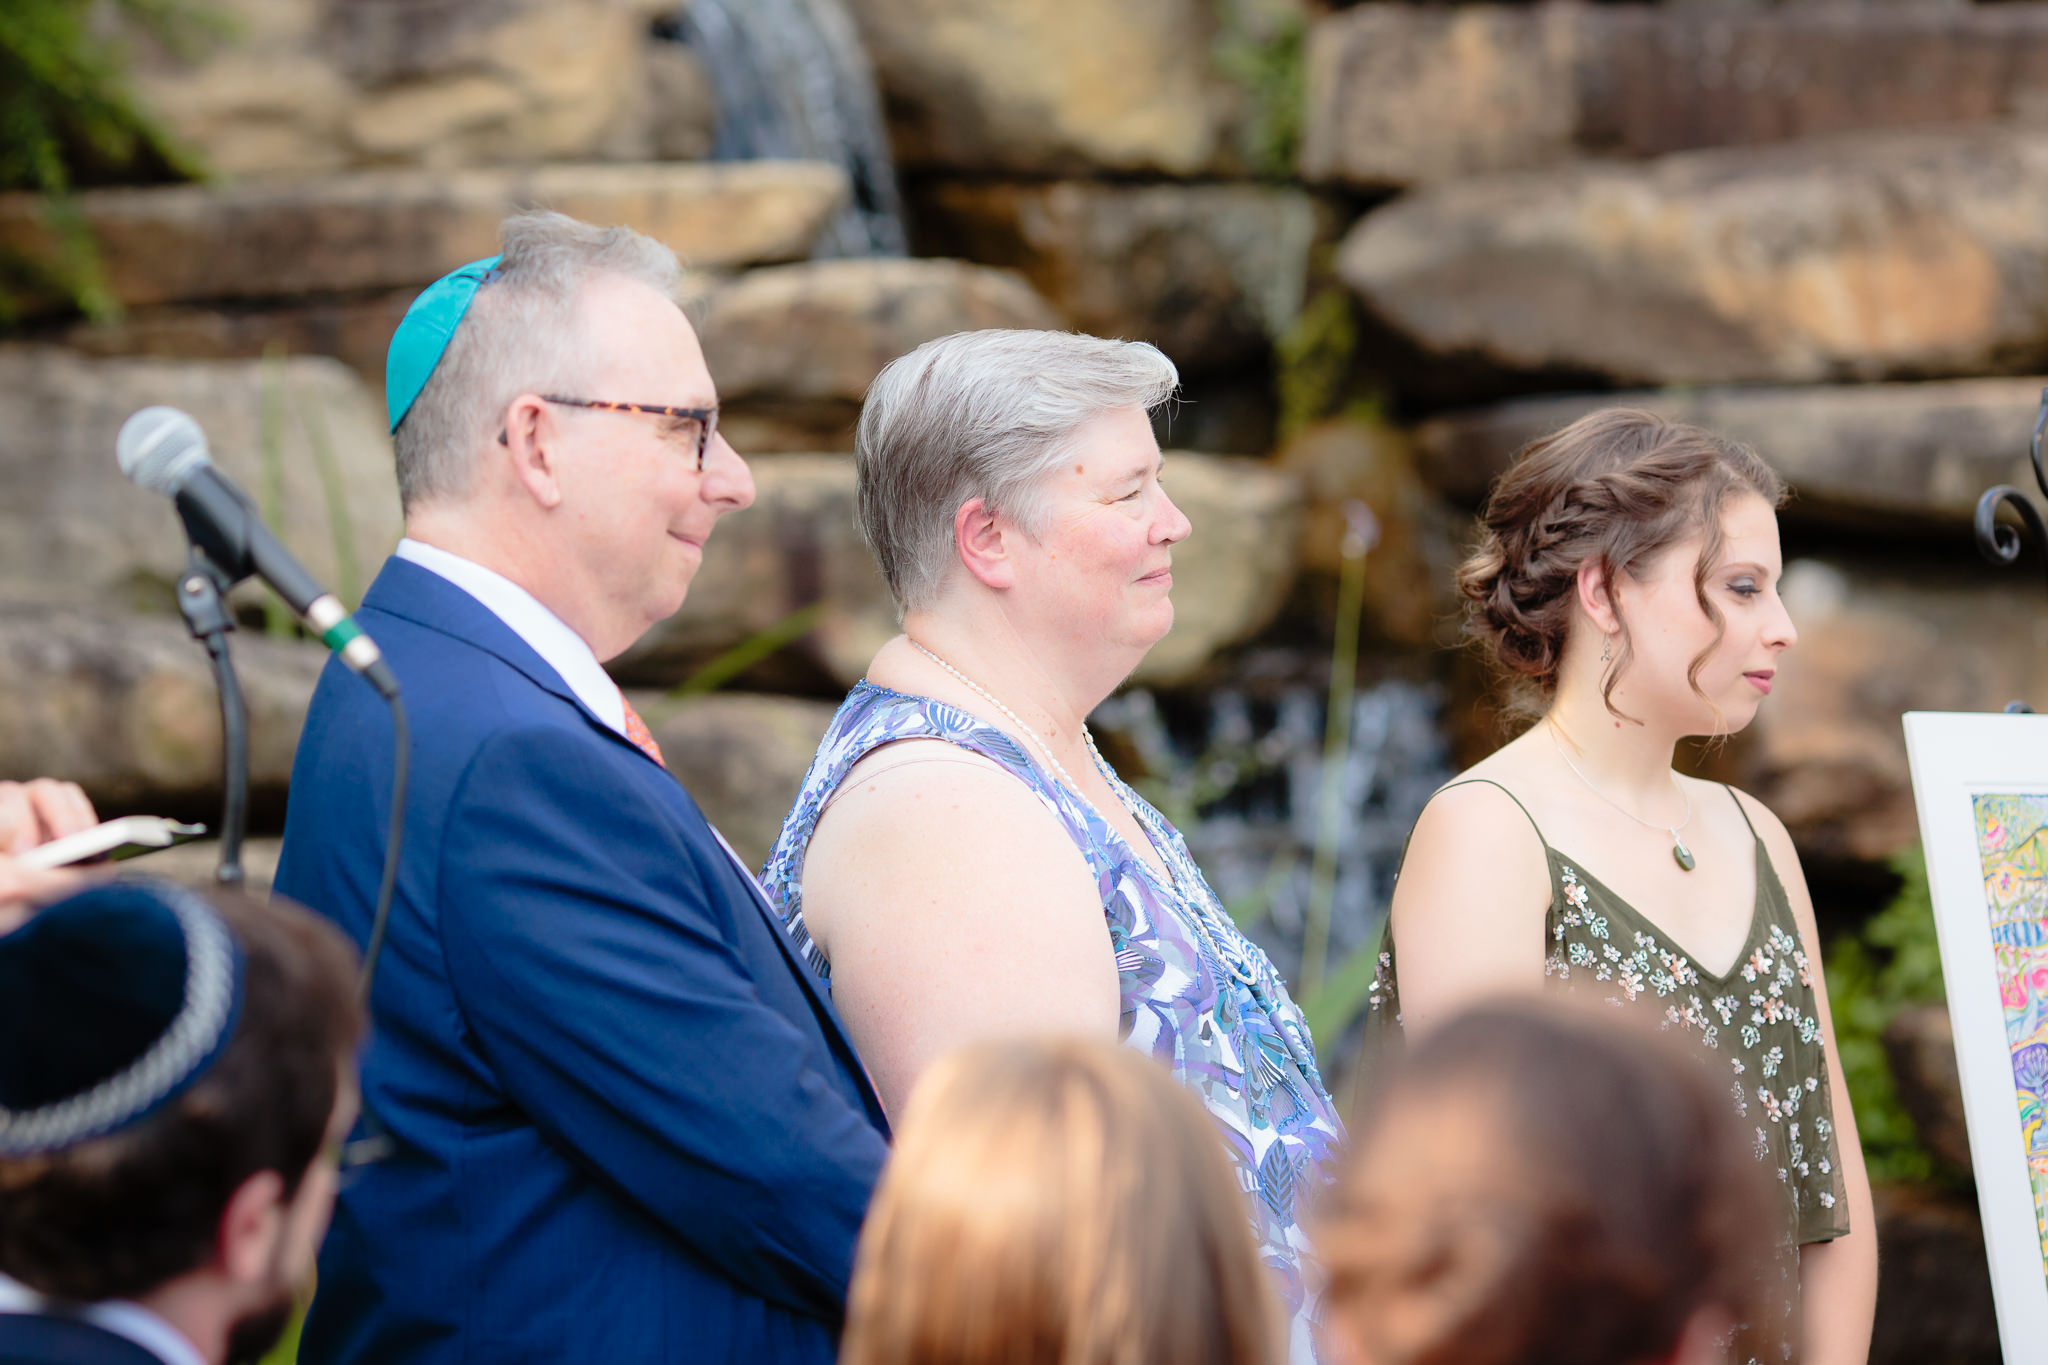 Parents and sister of the bride smile as she gets married at Phipps Conservatory